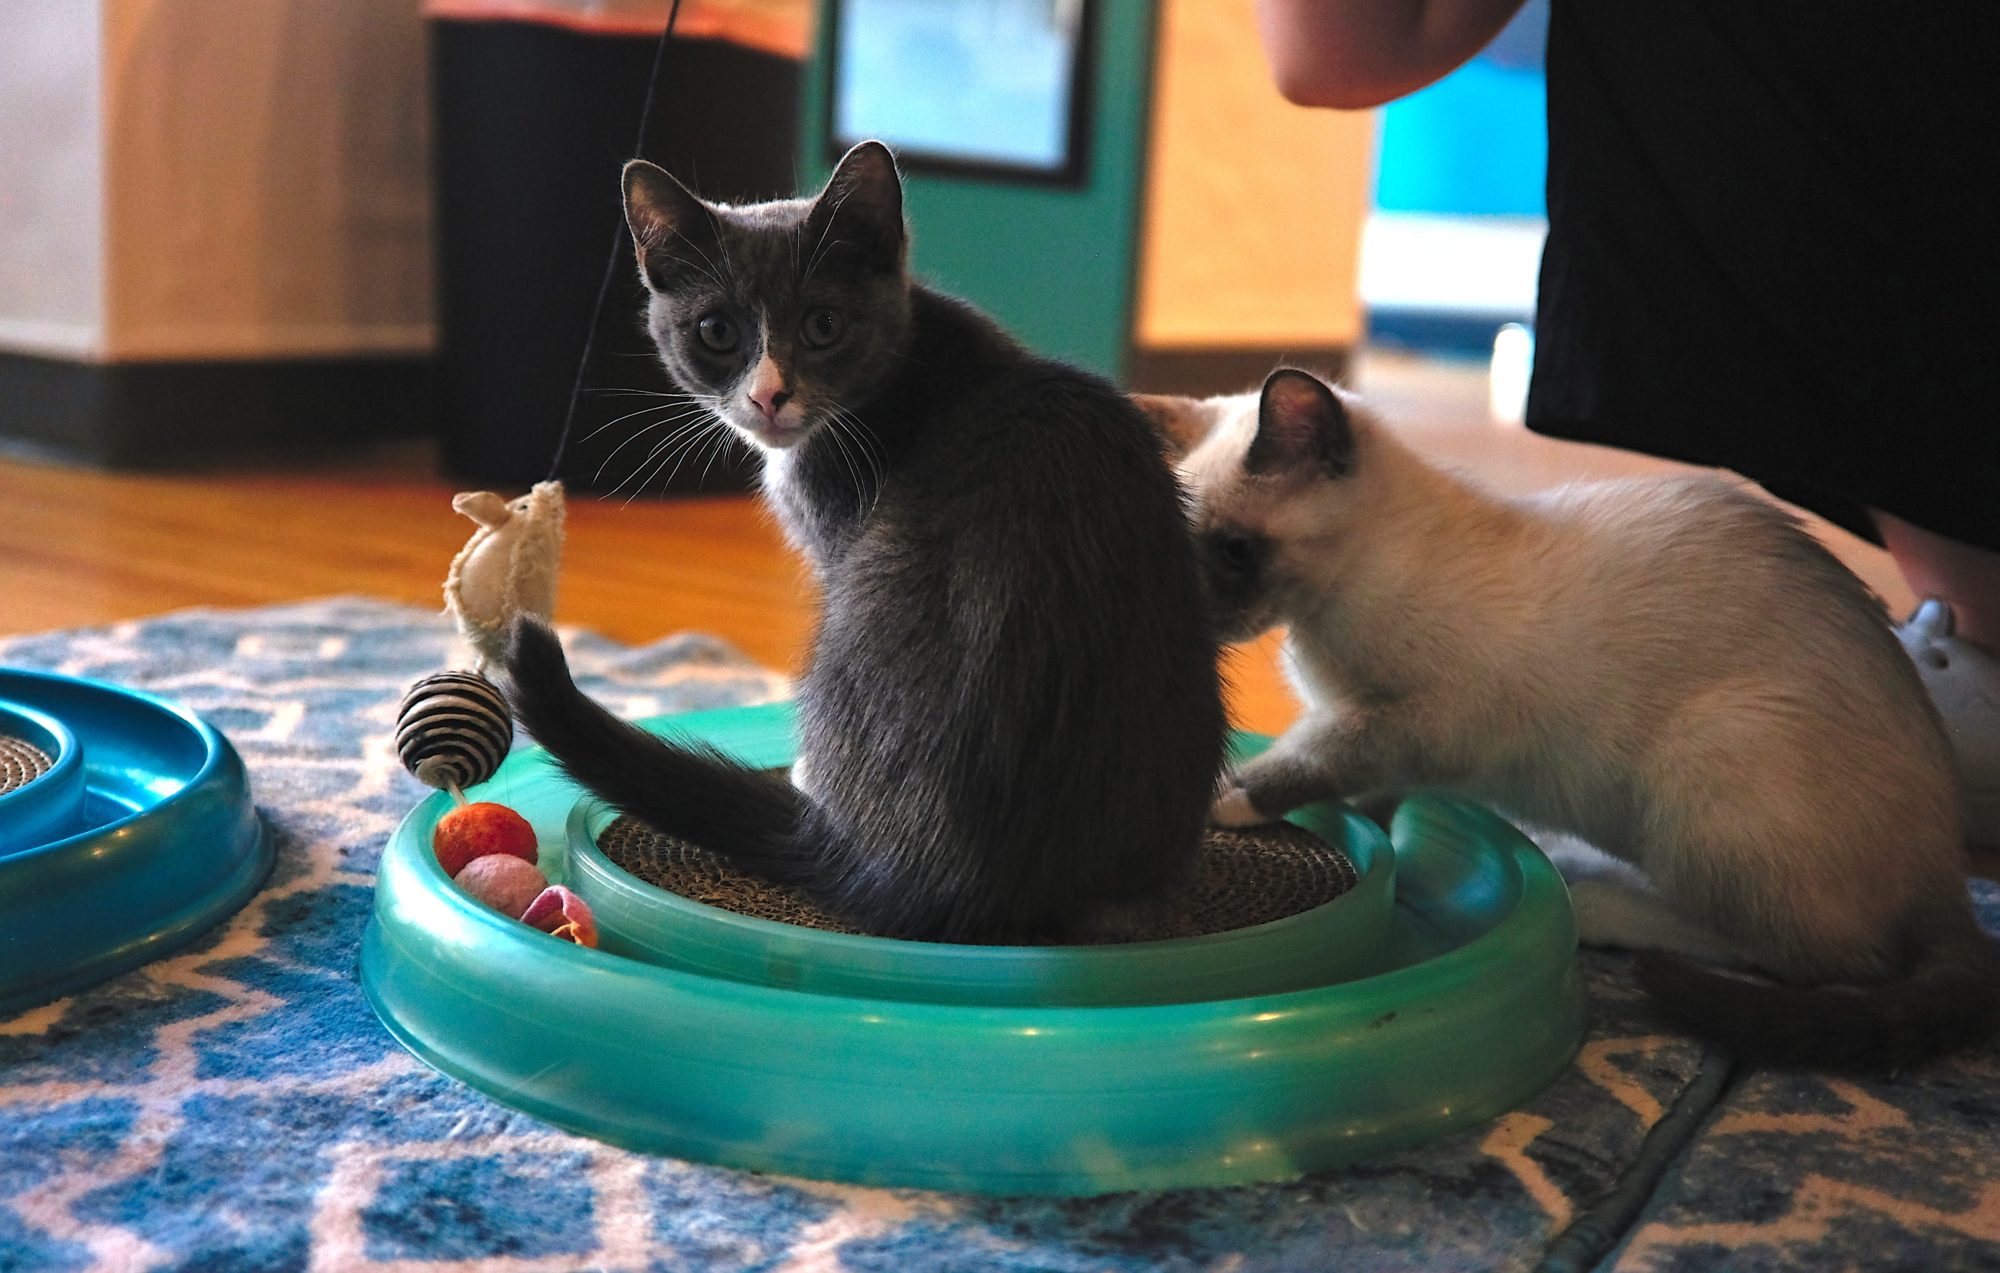 Cats at a cat cafe in Greensboro